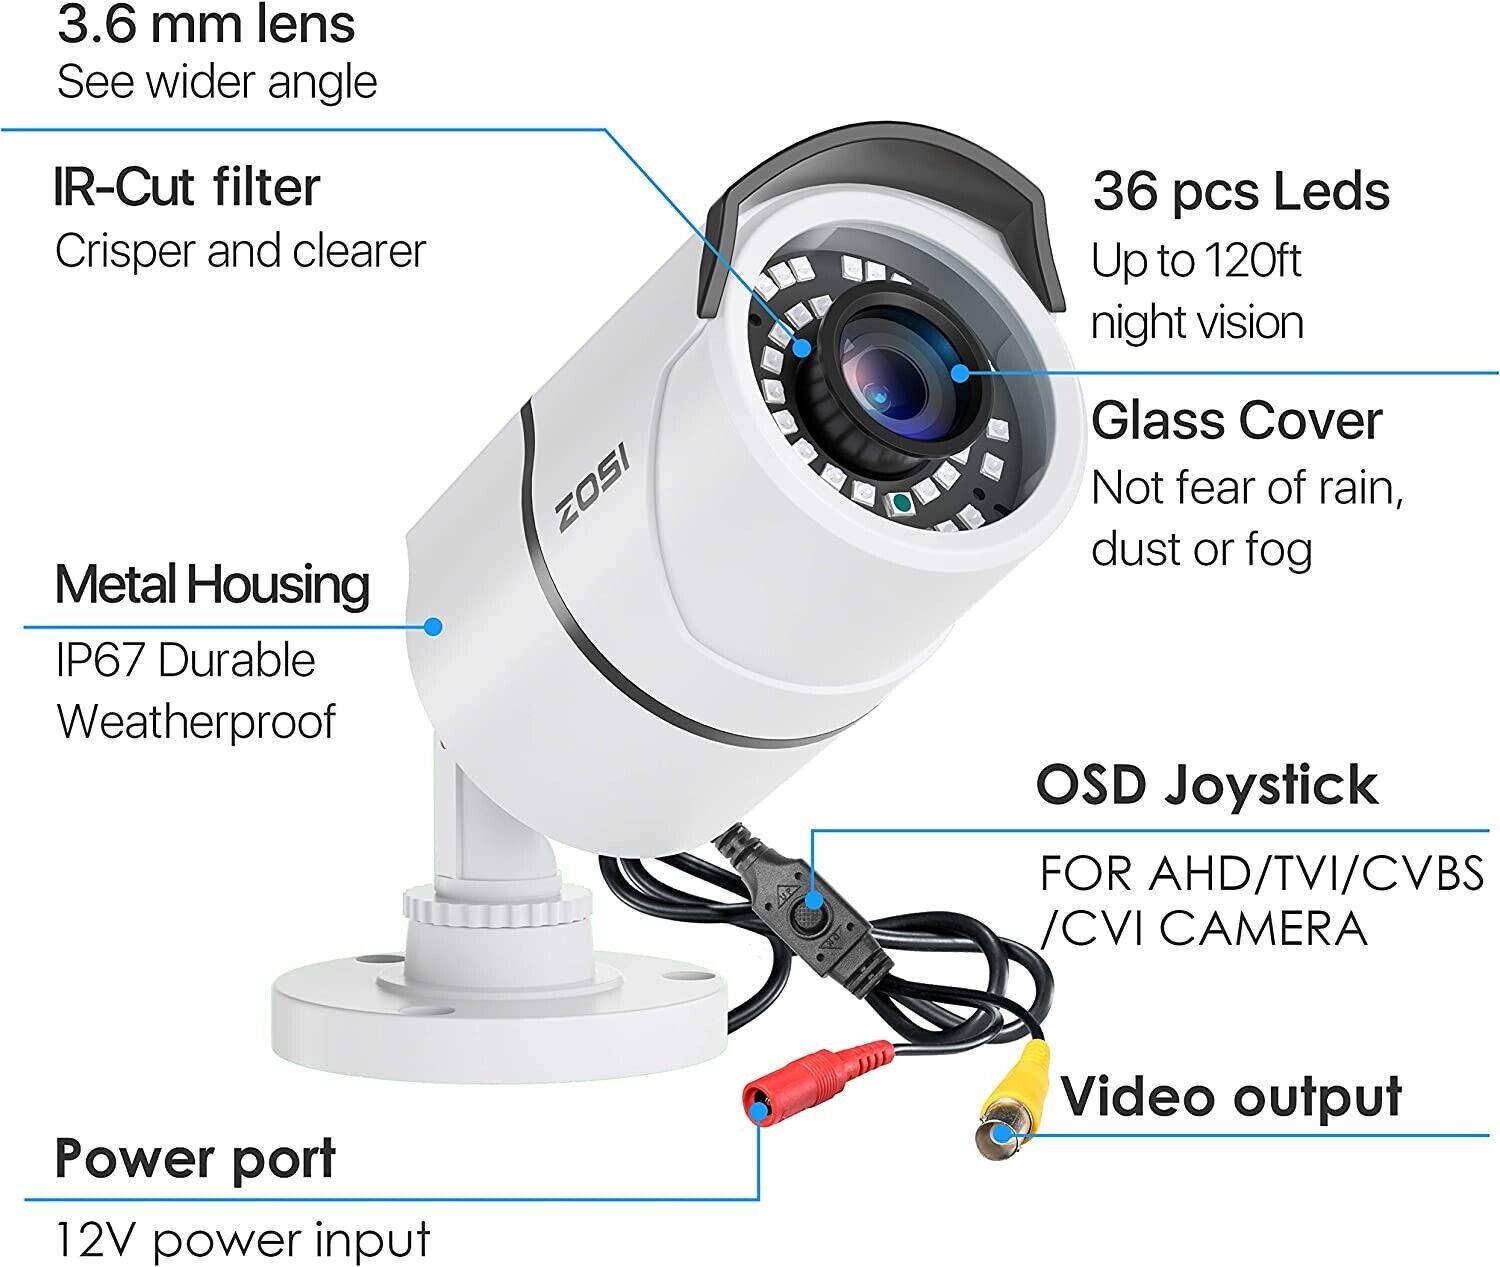 ZOSI 4PCS 4in1 1080P Waterproof Home Outdoor Security Camera Surveillance 120ft ZOSI Does Not Apply - фотография #2